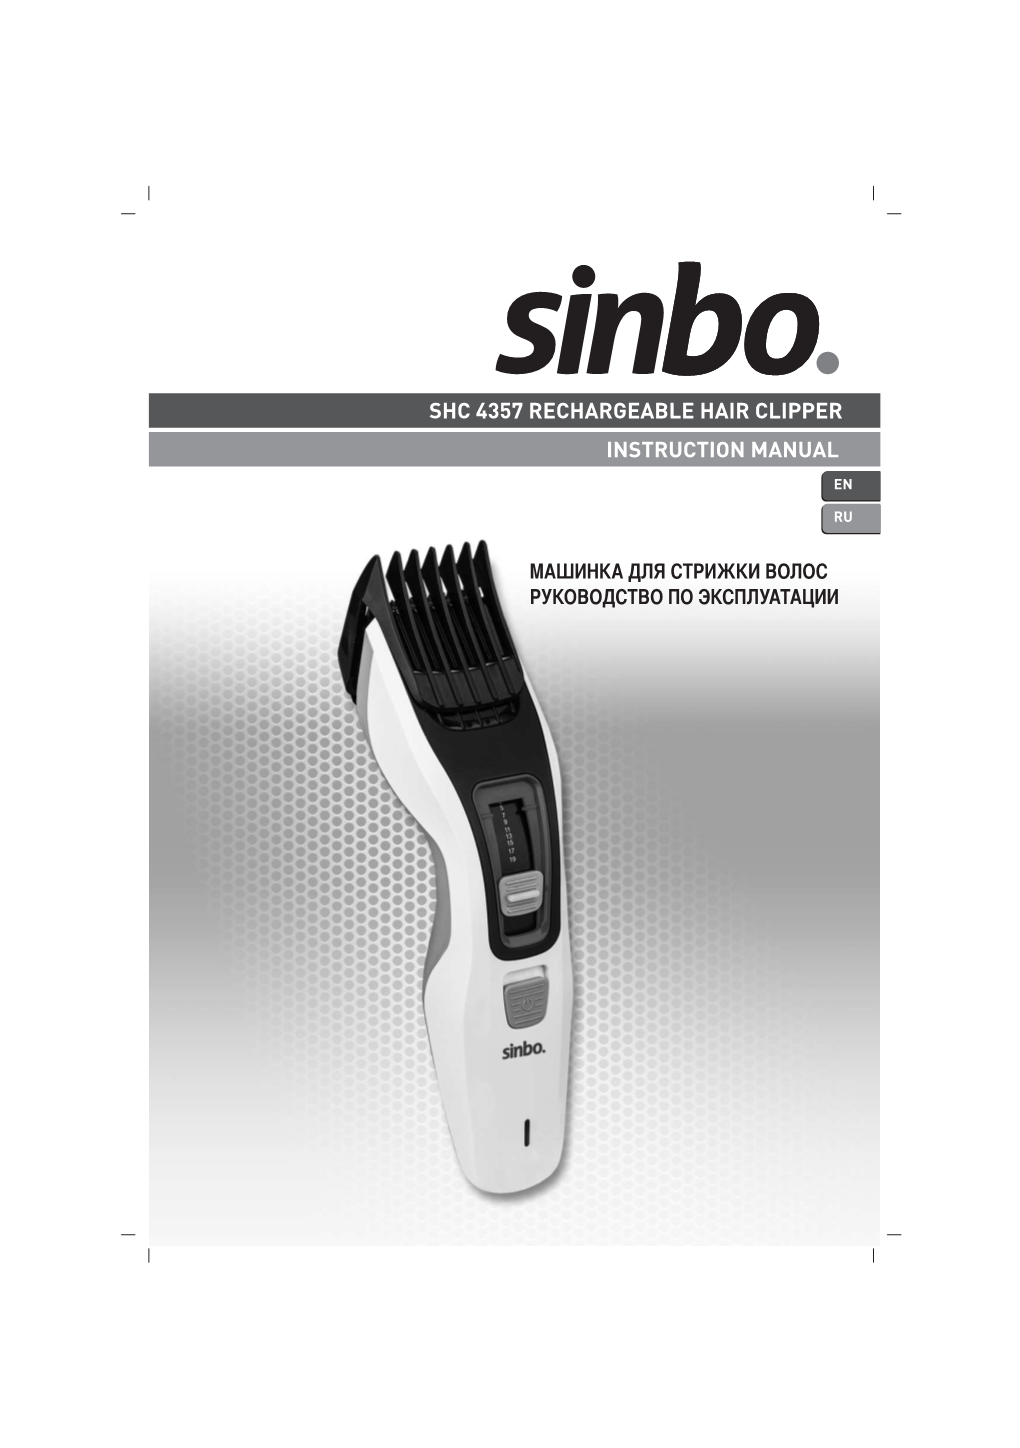 Shc 4357 Rechargeable Hair Clipper Instruction Manual